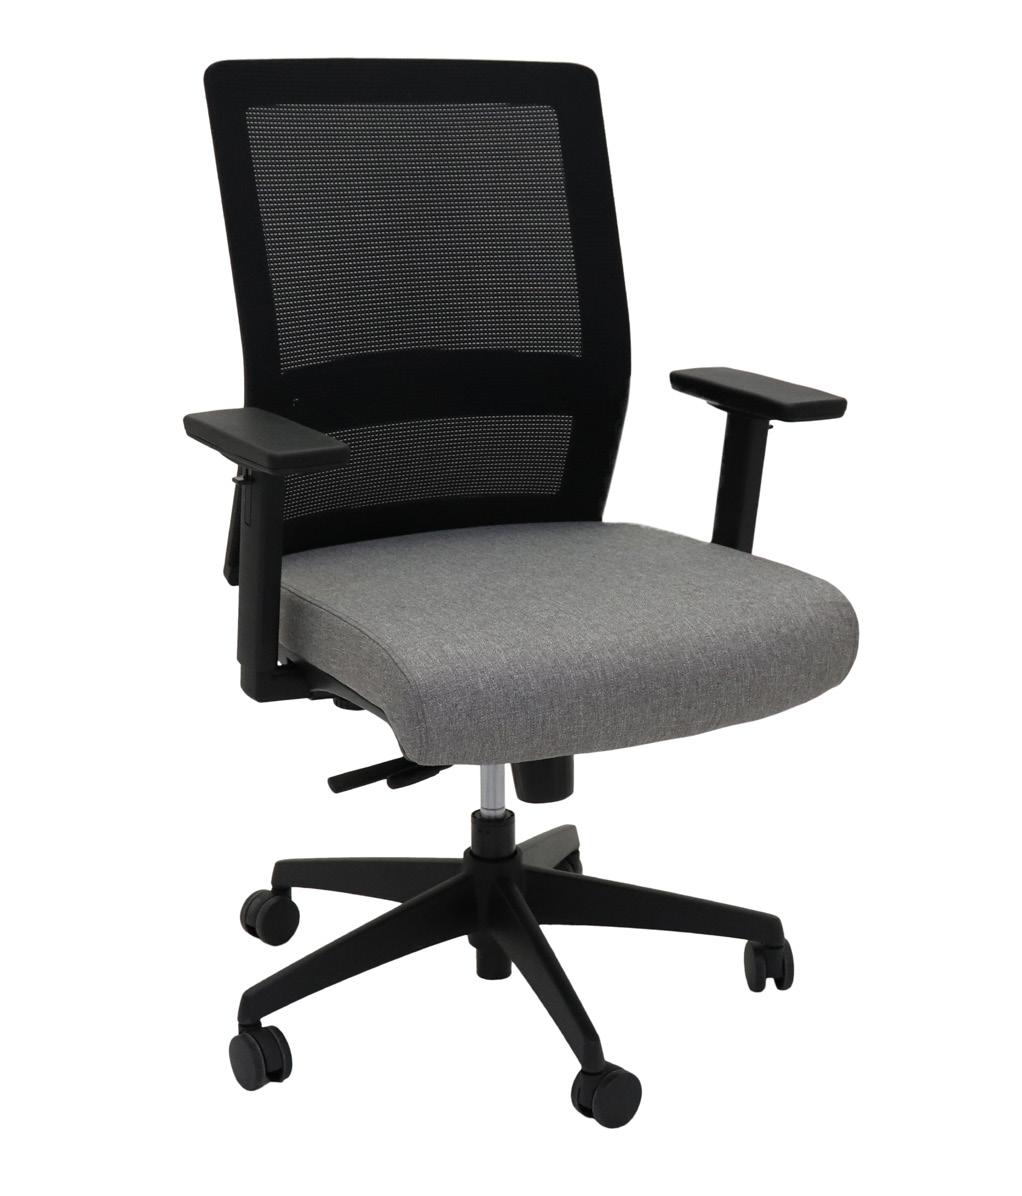 Gesture Mesh Task Chair Medium mesh back task chair. Synchro-dynamic mechanism with seat slider. 130 Kg Weight Rating. Black mesh back rest with light grey seat pan.